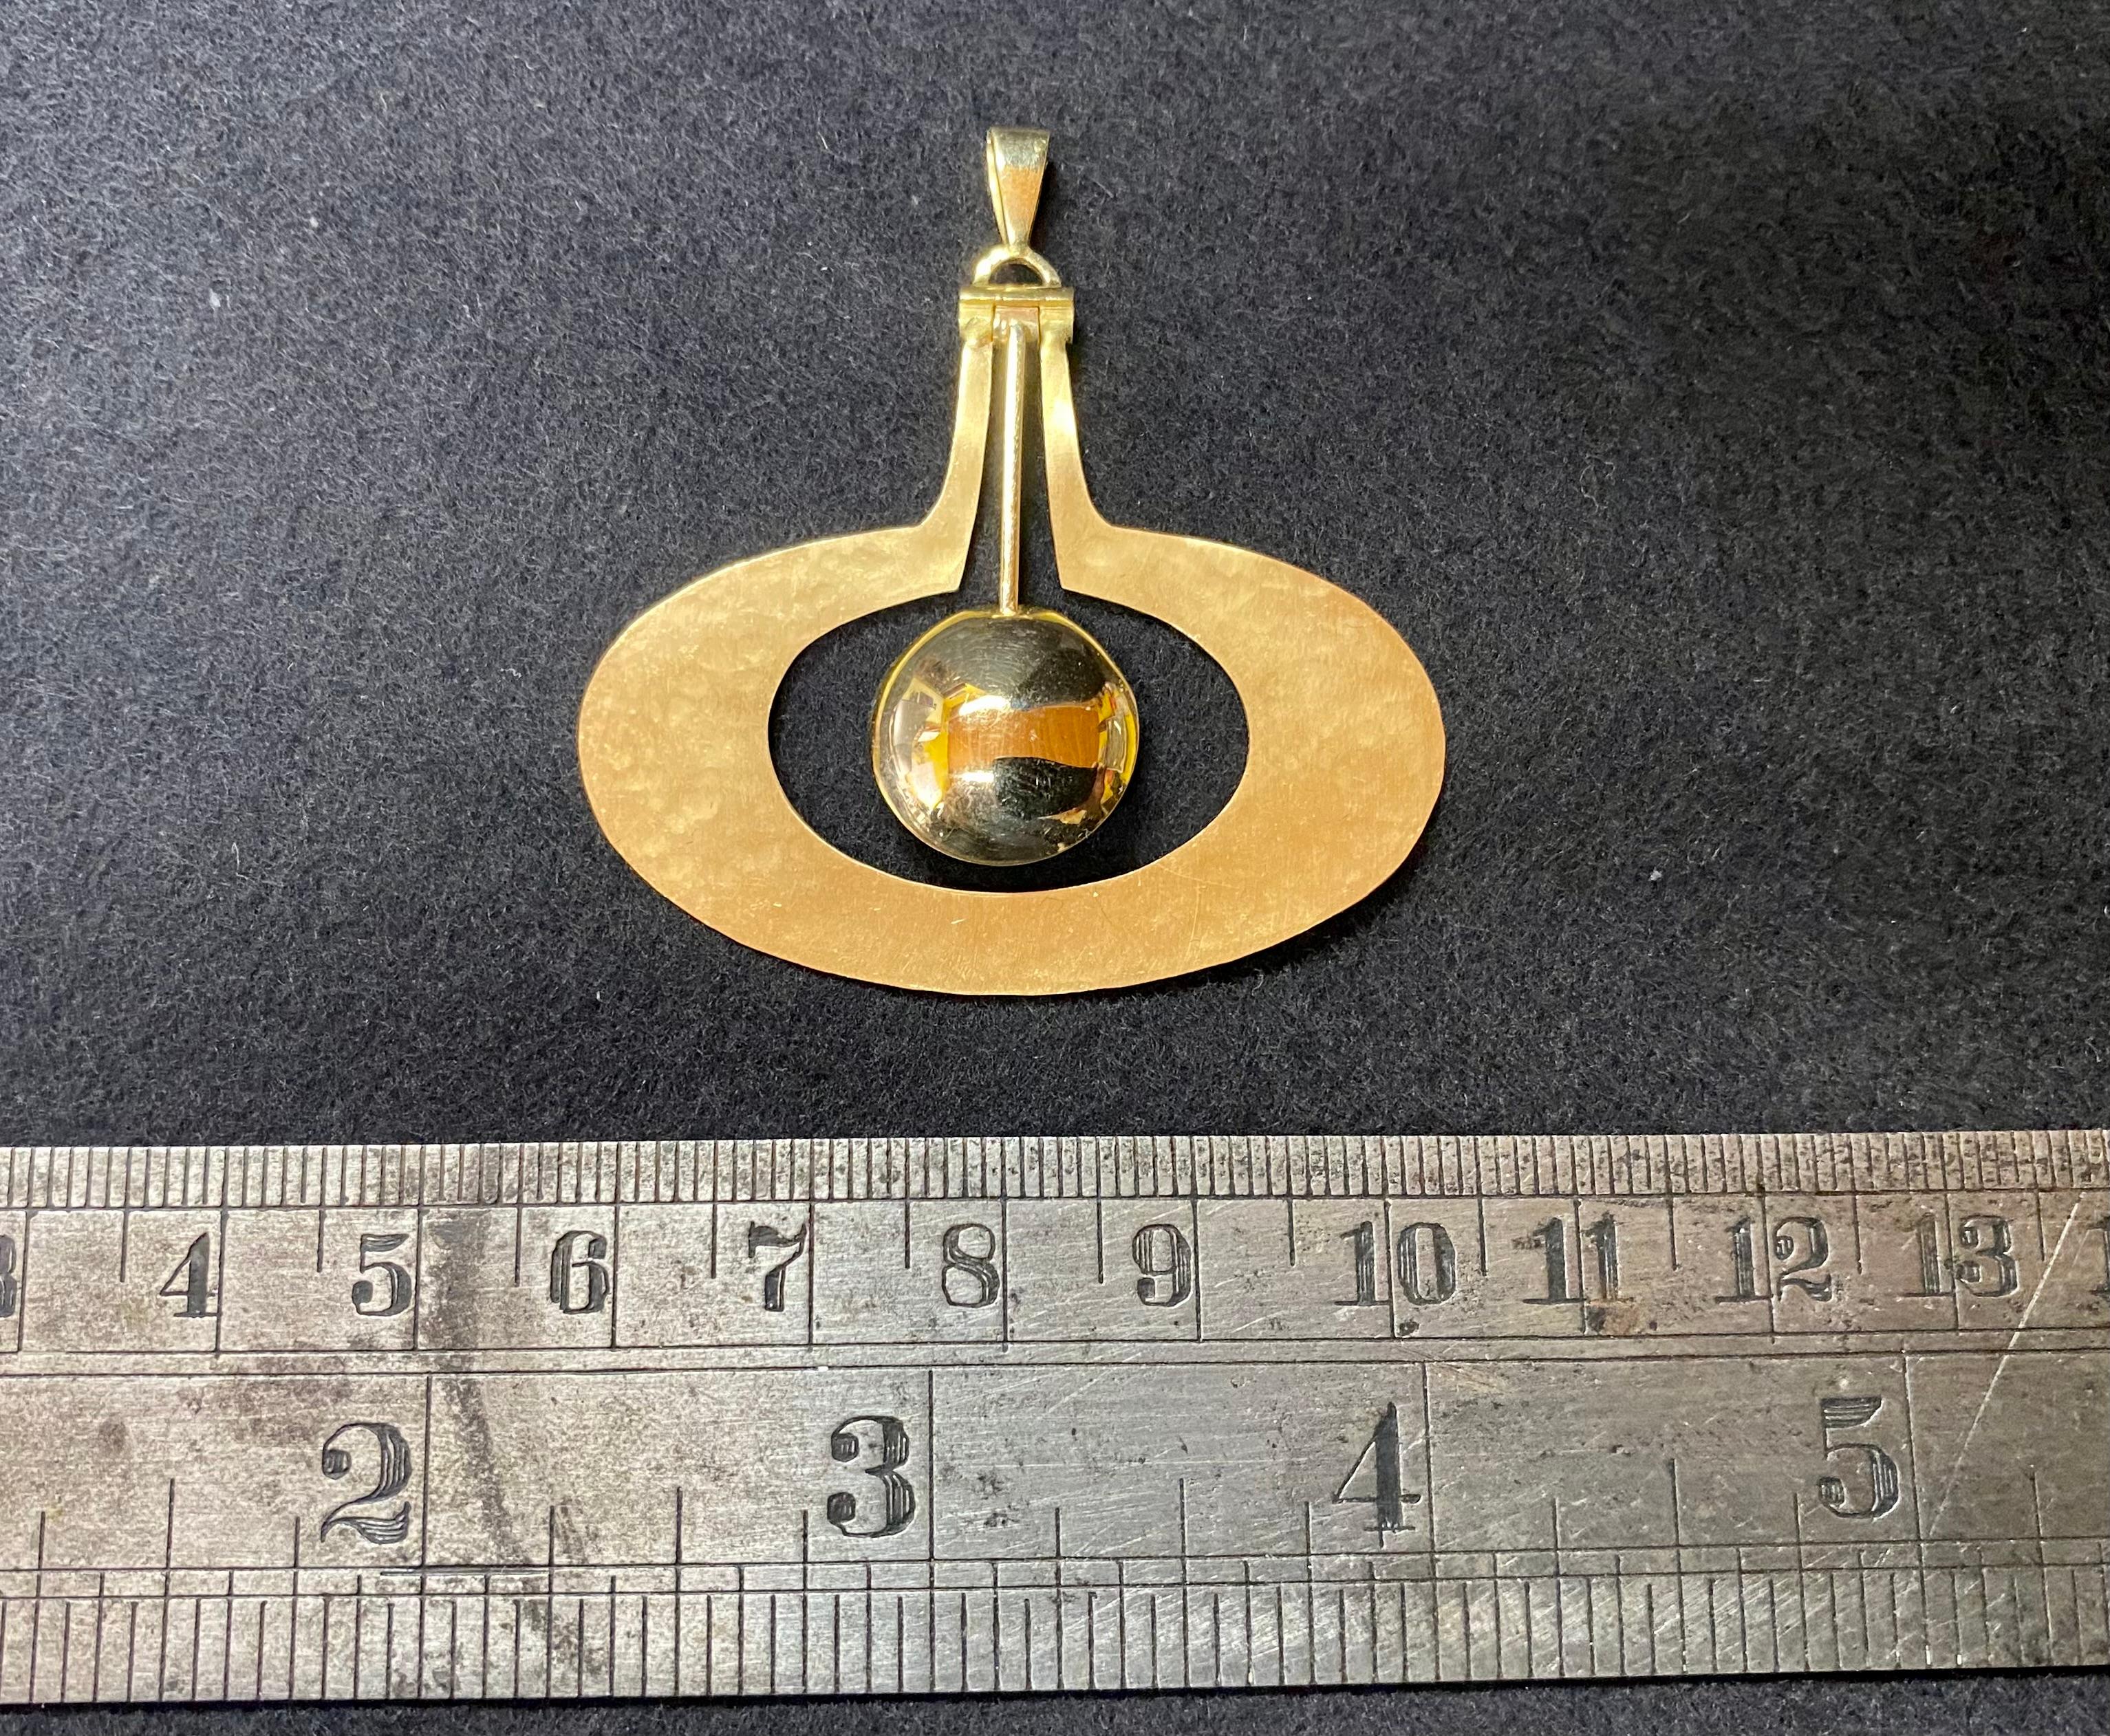 Tapio Wirkkala
Rare pendant.
Pear Pendant in 18K gold designed by Tapio Wirkkala.
Tapio Wirkkala Numbered Jewelry 29/100.
Kultakeskus made these limited edition Gold.
750 = 18 Karat Gold
The pendant is sold without a chain.
I also have a lot of